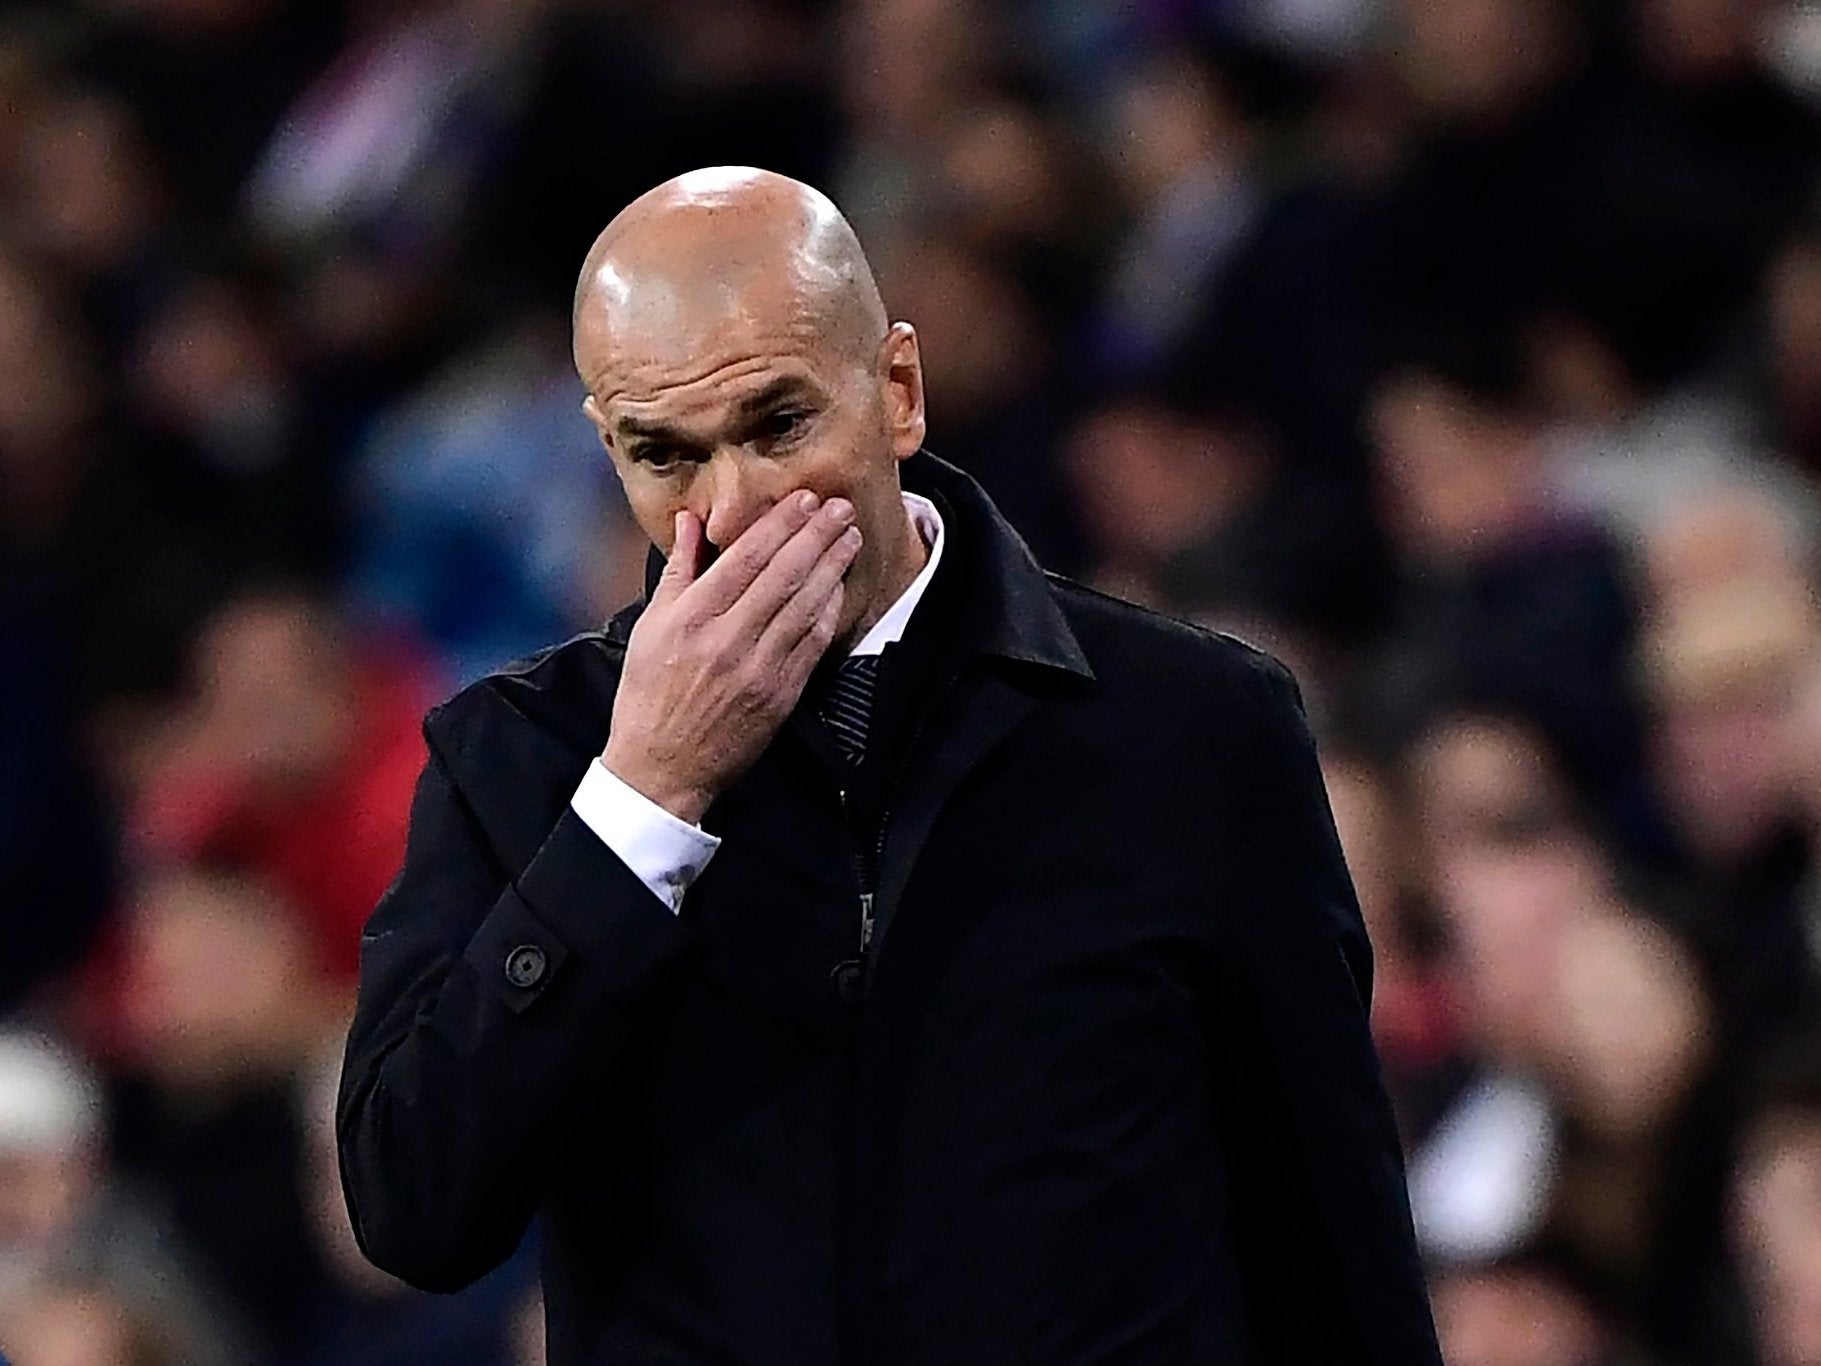 Zidane's side have little to play for over the remainder of the season